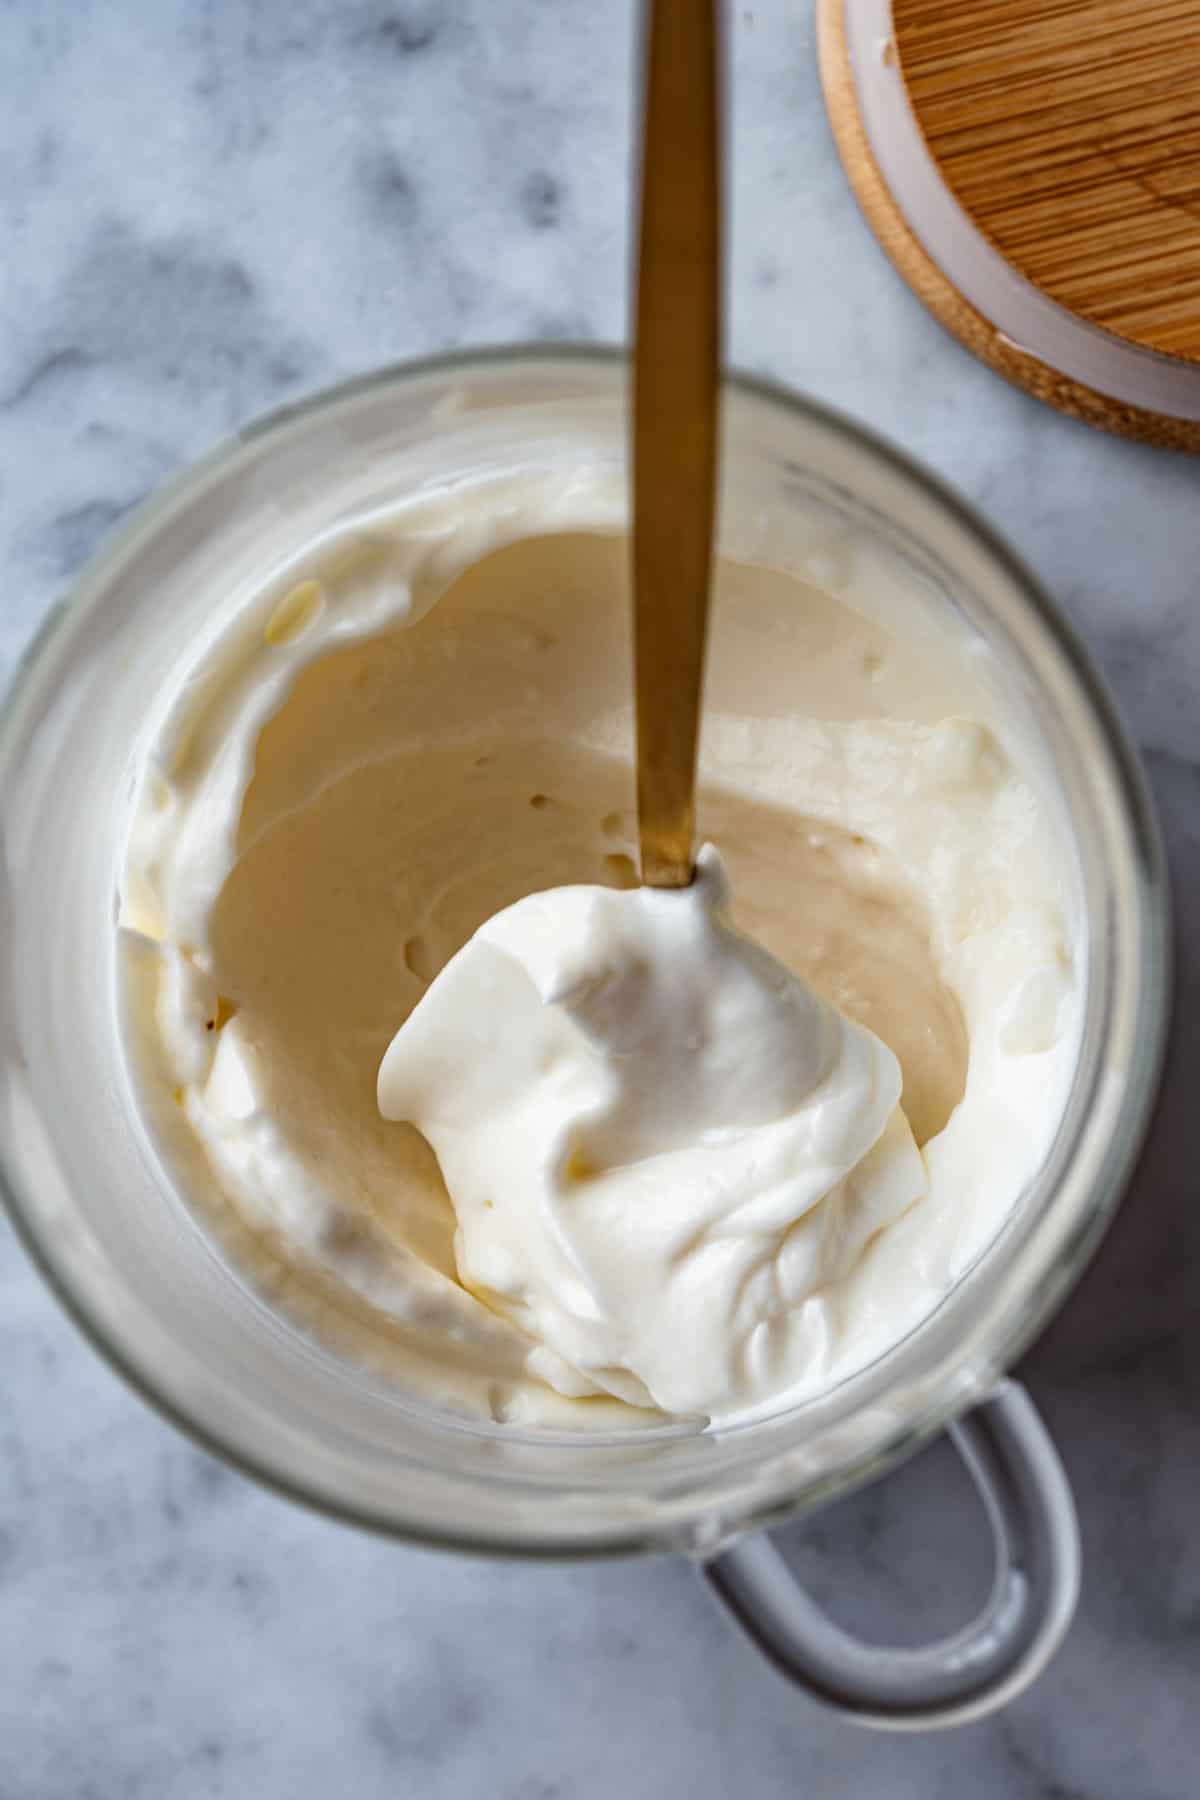 A glass jar with easy creamy white vegan mayonnaise inside being removed with a gold spoon, and a wooden lid beside it.